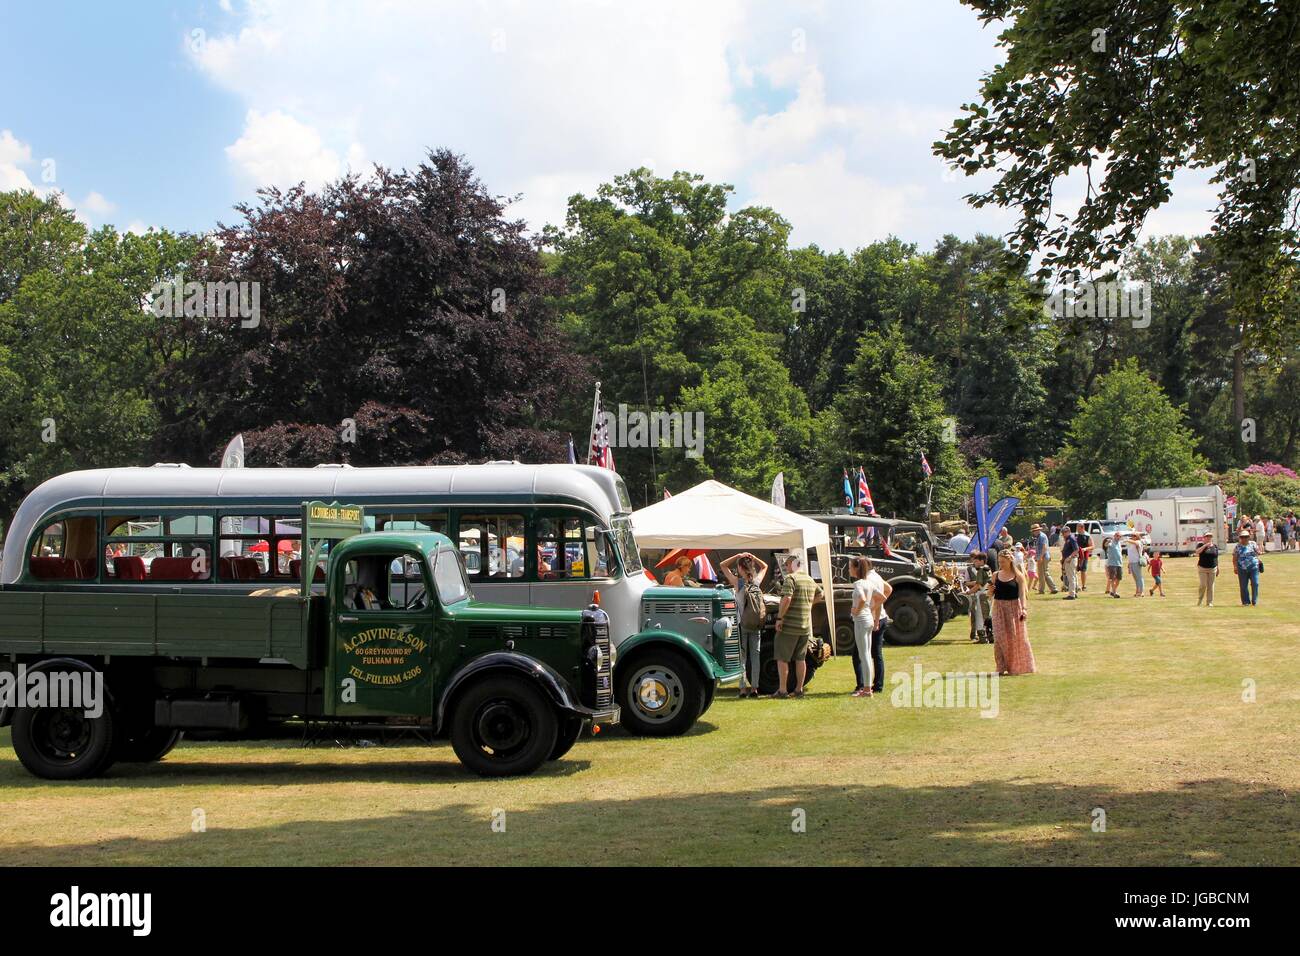 Sandhurst, UK - June 18 2017: Vintage truck, bus and military vehicles at a car show with enthusiasts in background Stock Photo